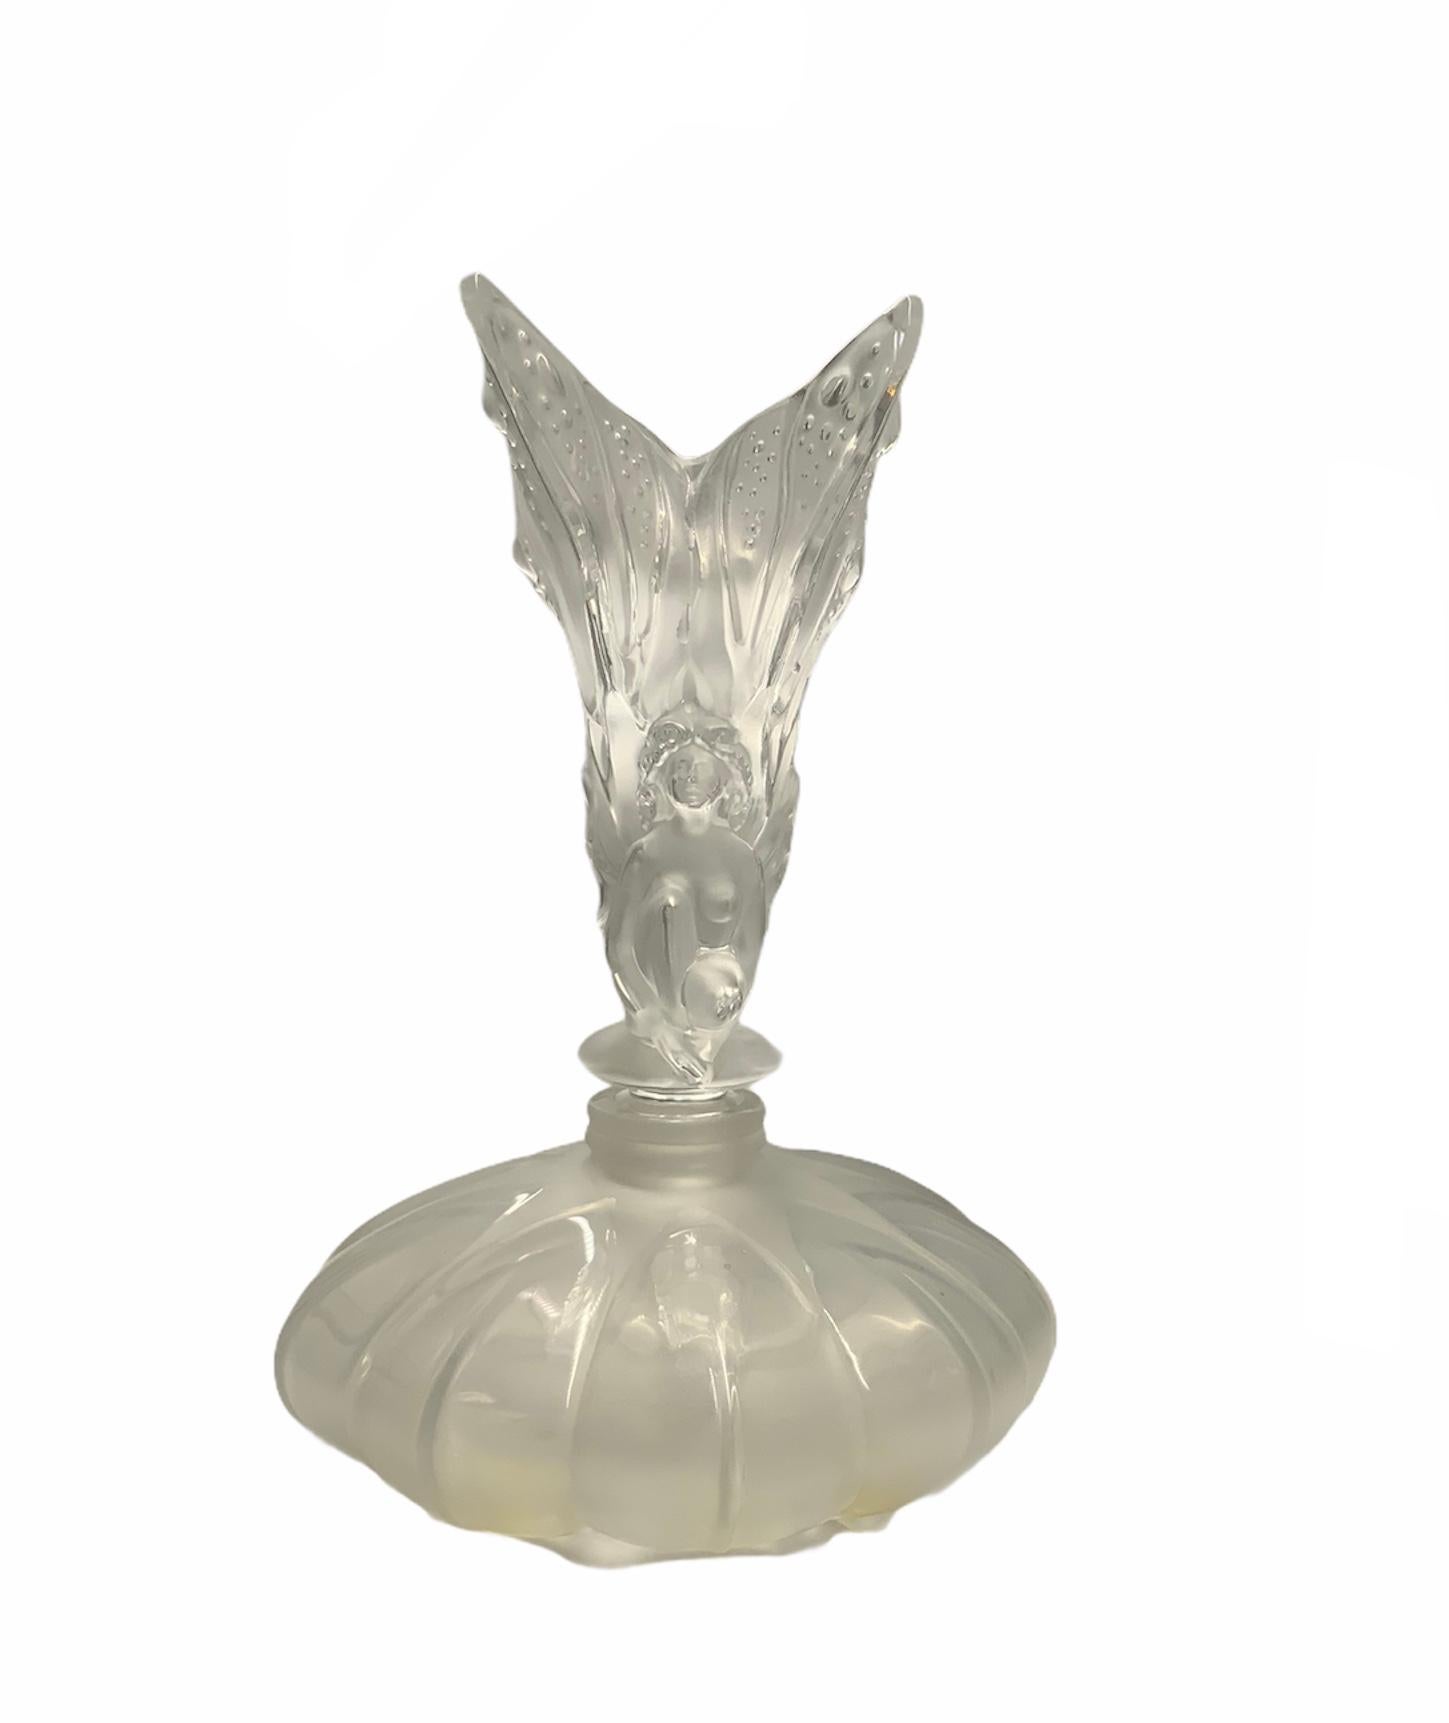 French Lalique Crystal “Les Fees” 'The Fairy' Perfume Bottle